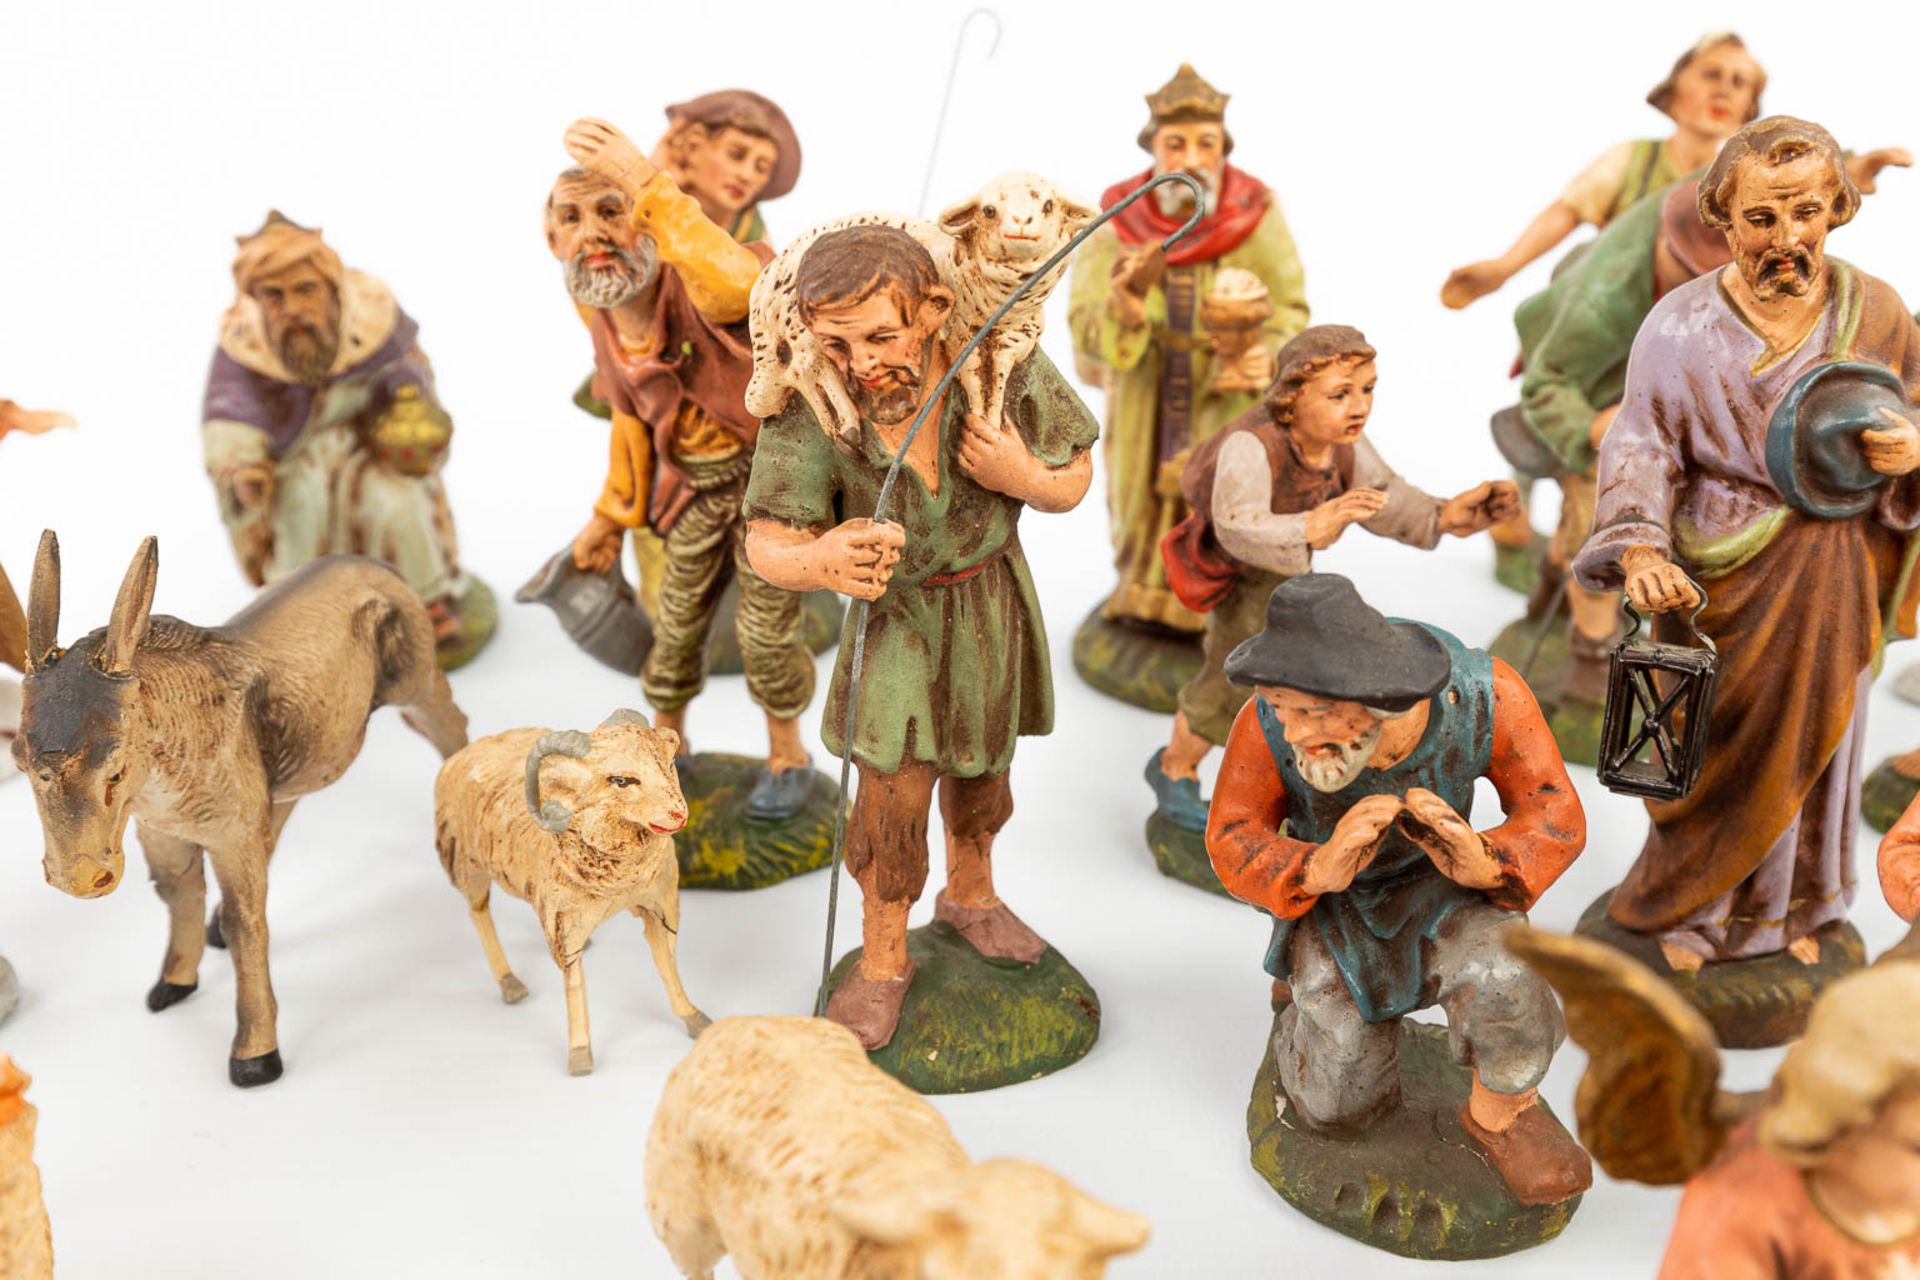 A large and extended Nativity scene with figurines and animals made of papier maché. - Image 15 of 20